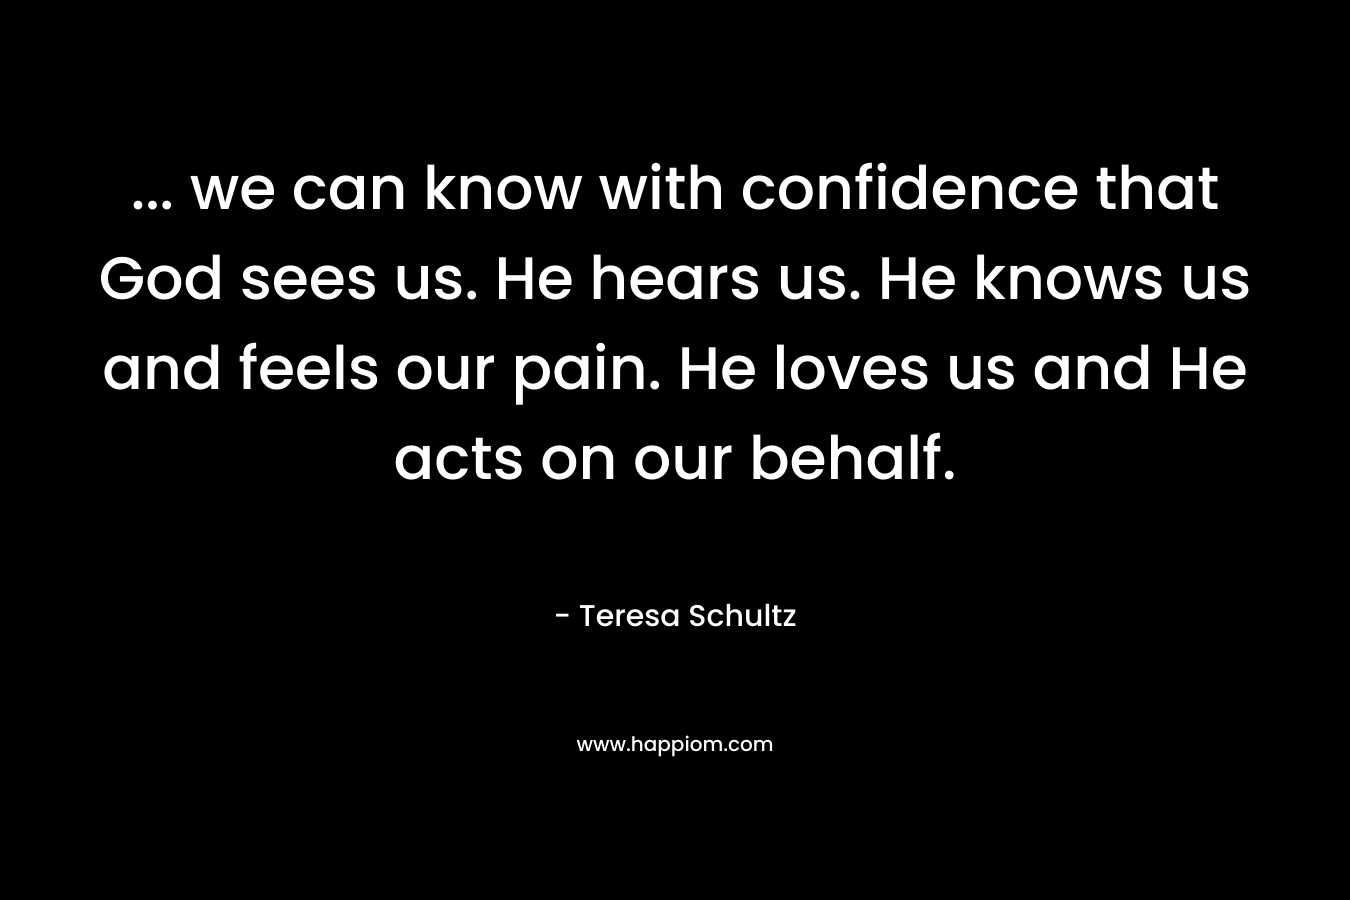 ... we can know with confidence that God sees us. He hears us. He knows us and feels our pain. He loves us and He acts on our behalf.